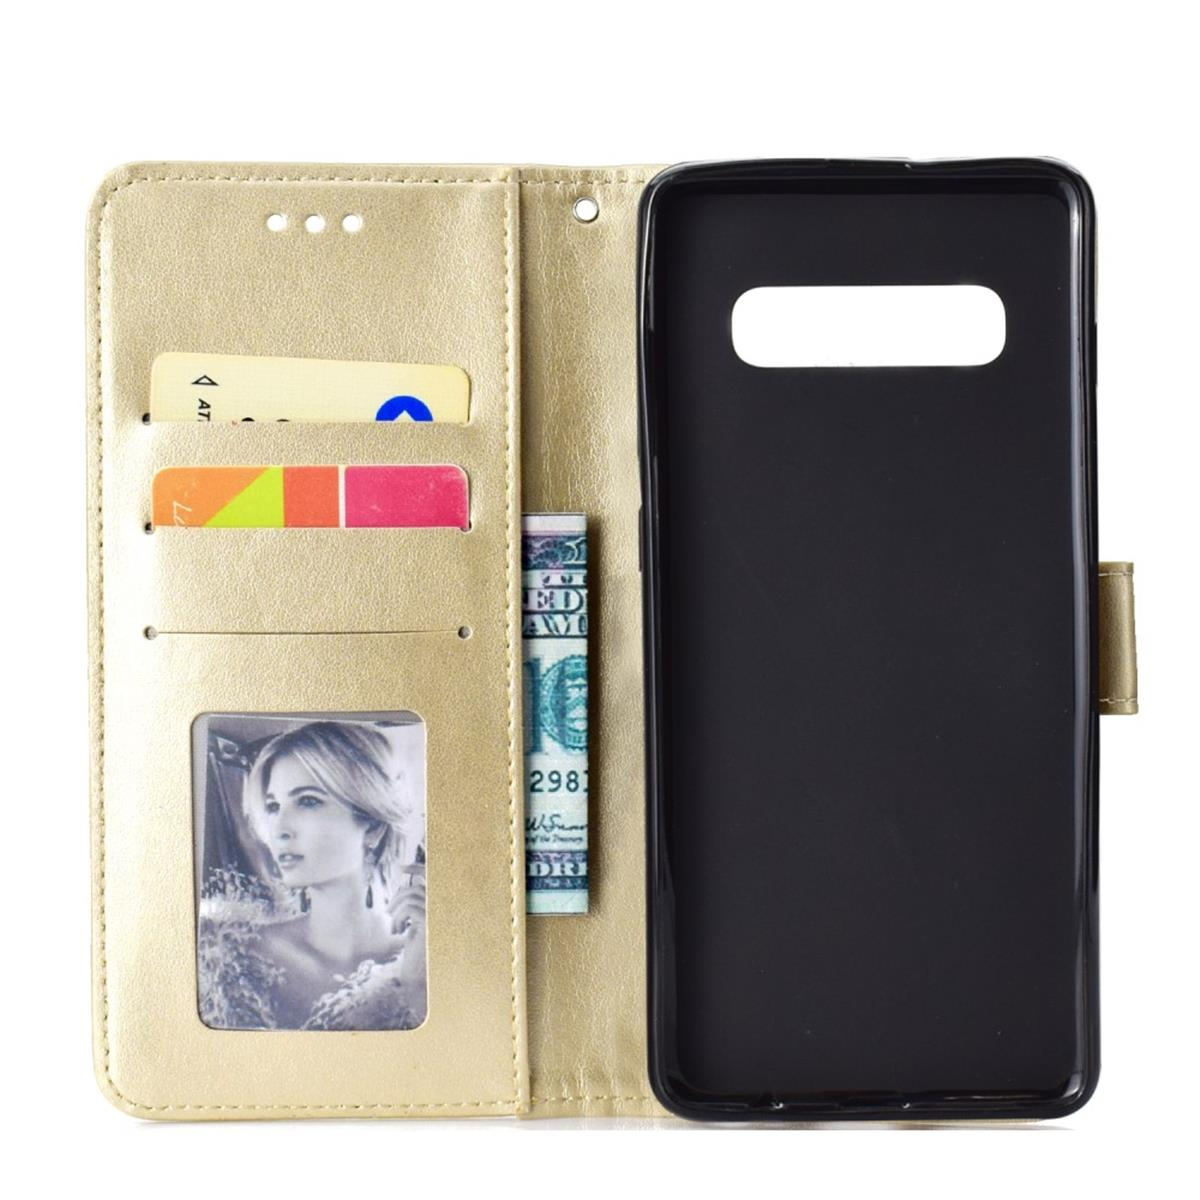 COVERKINGZ Klapphülle Bookcover, Mandala S10+ Galaxy [Plus], Gold Samsung, Muster, mit